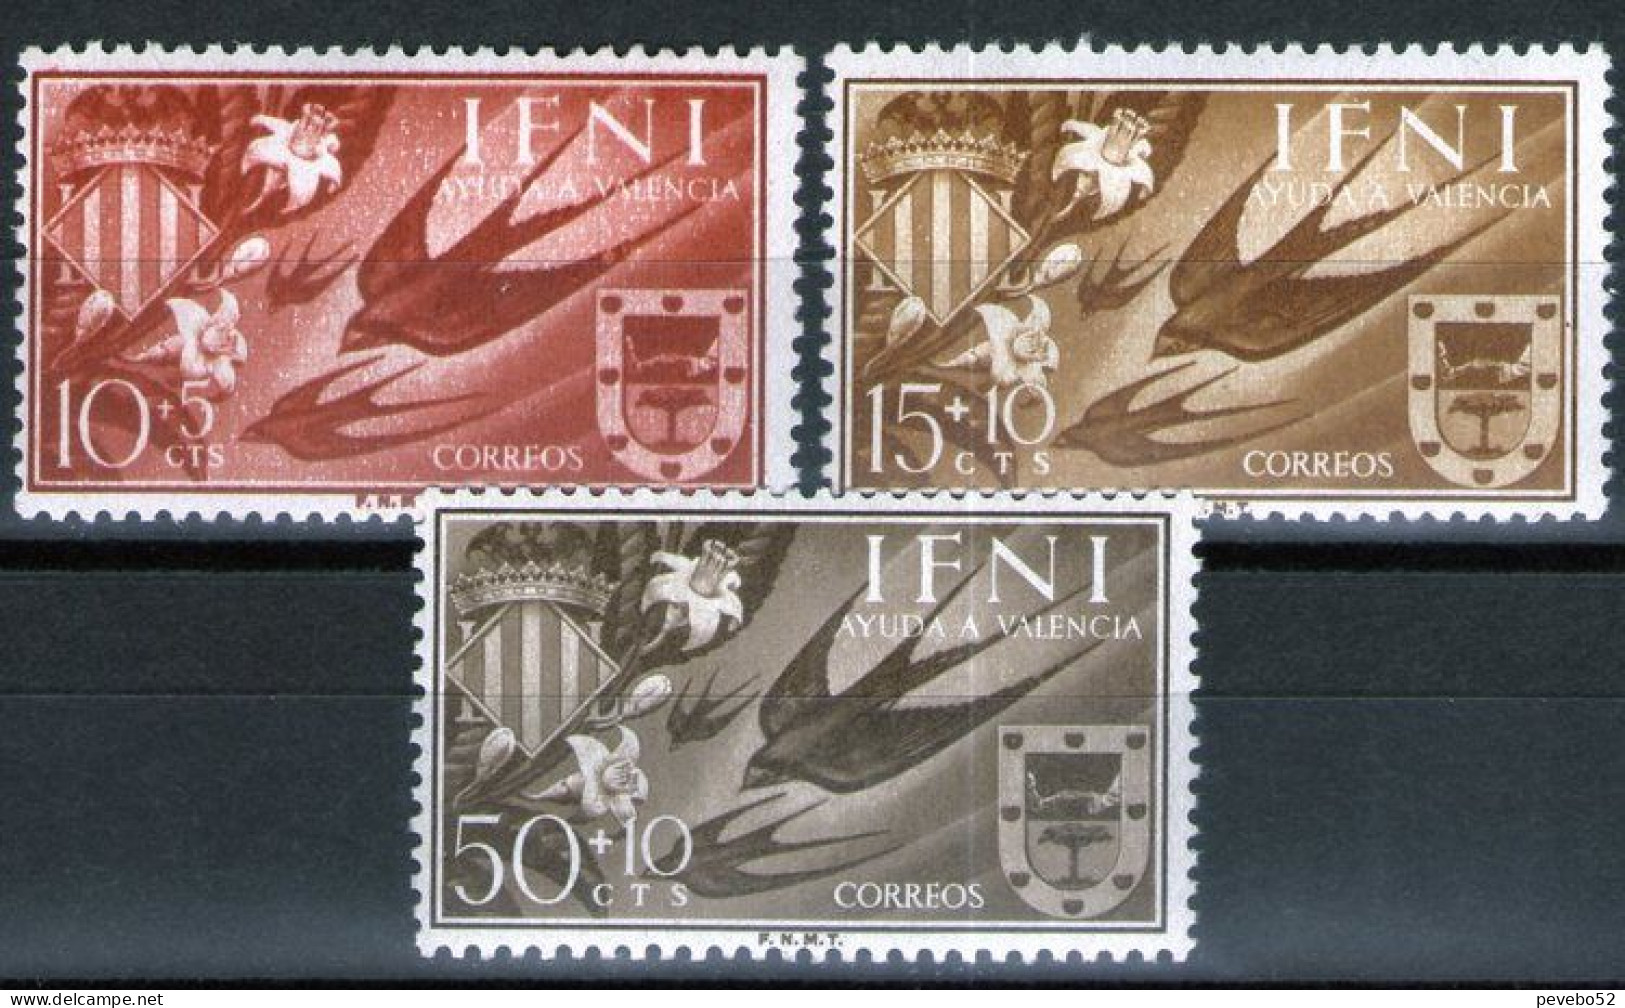 SPAINISH IFNI 1958 - Charity Stamps For Valencia - Barn Swallow & Coat Of Arms MNH - Ifni